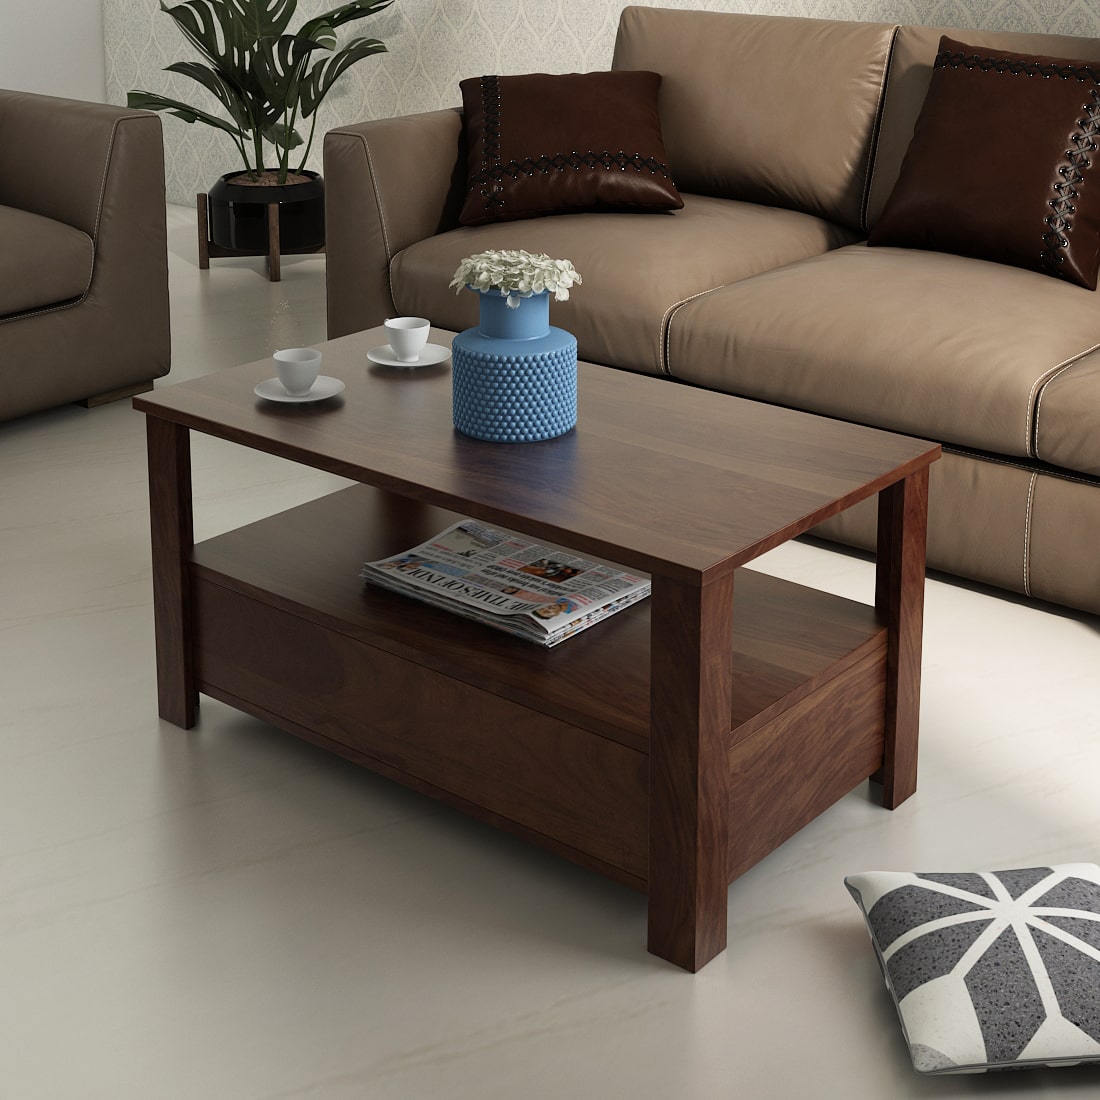 centre table | Spacewood Ecommerce